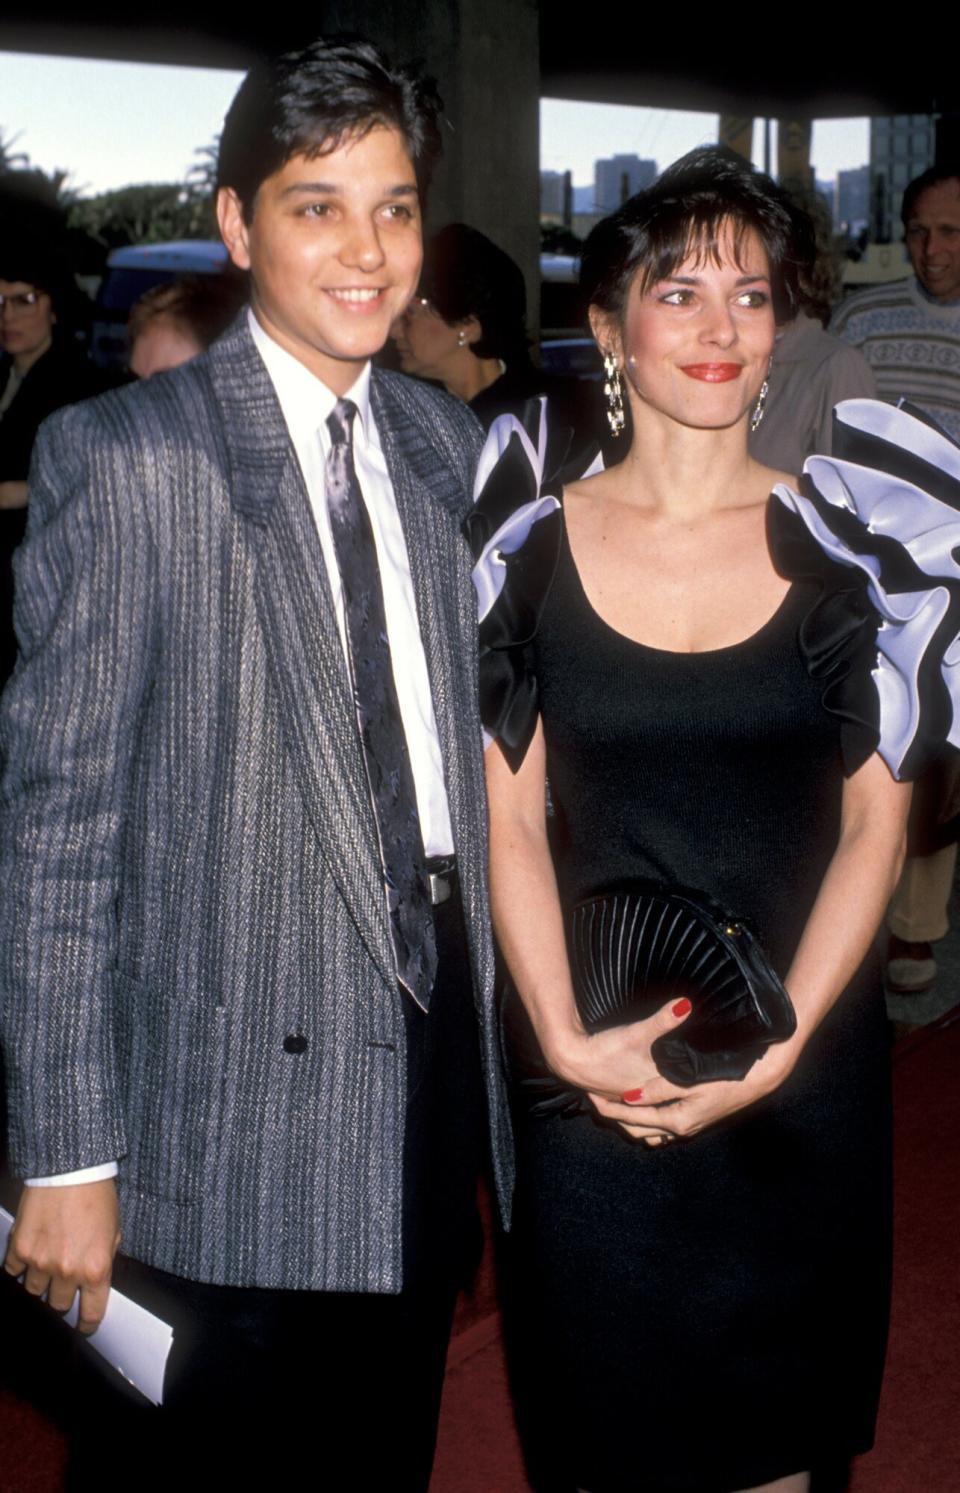 Ralph Macchio and Phyllis Fierro at the Premiere of 'Lawrence of Arabia' Restored Version, Century Plaza Cinema, Century City